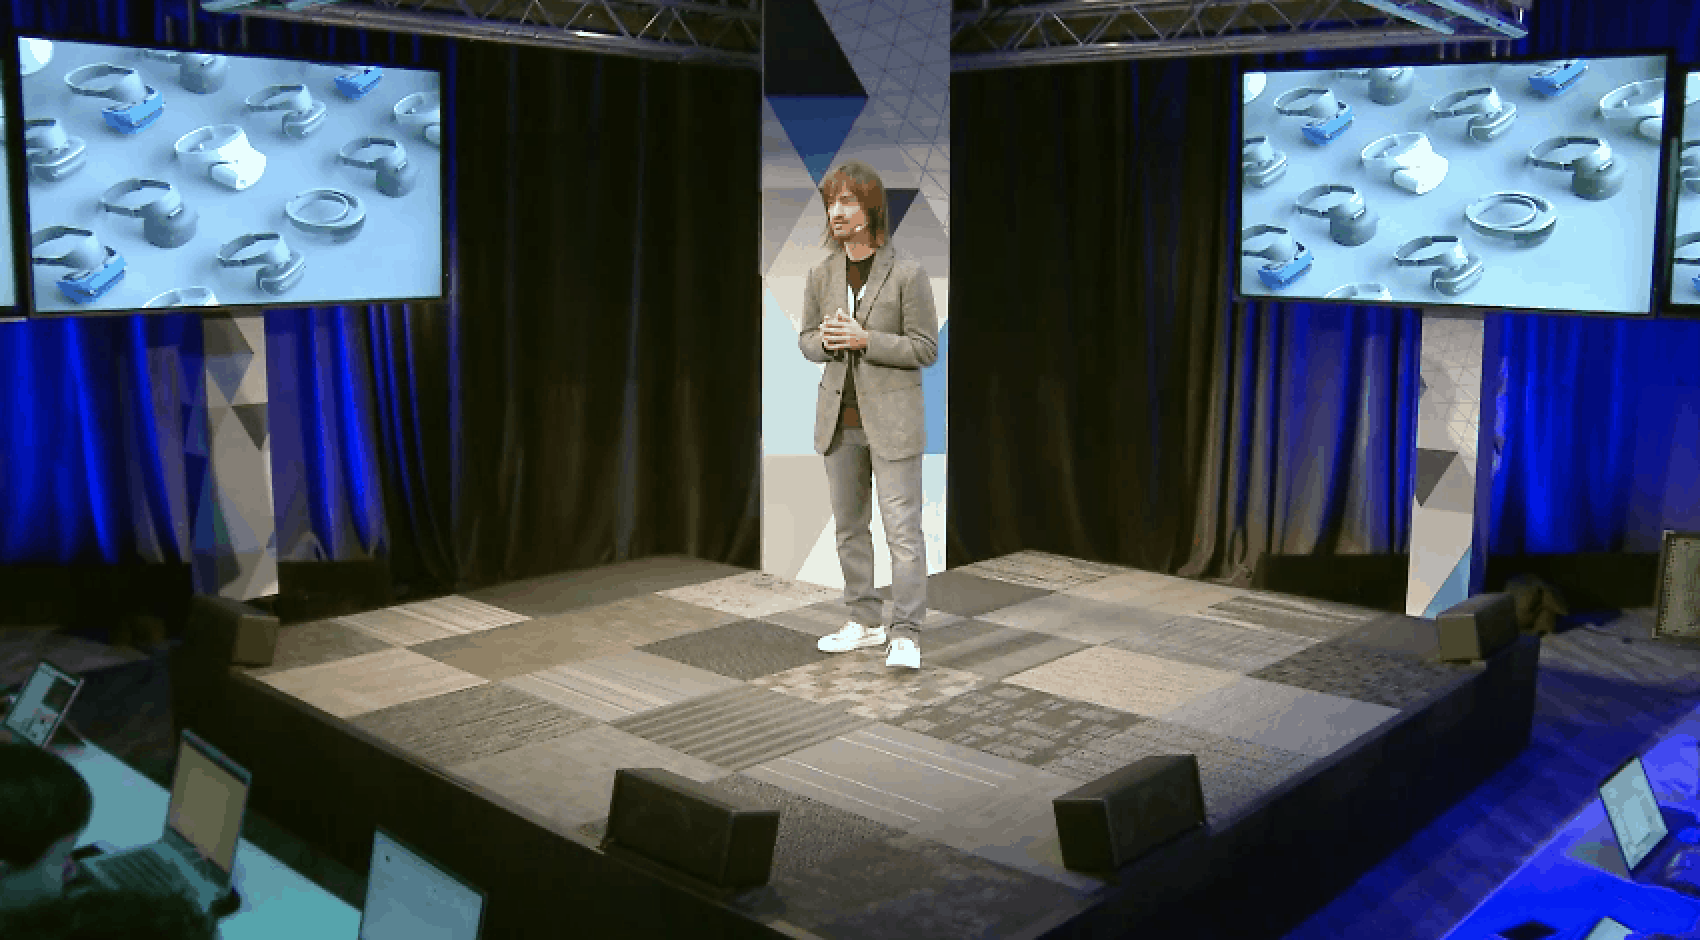 Alex Kipman promises exciting innovation coming for HoloLens and AR/VR in 2018 - OnMSFT.com - February 21, 2018